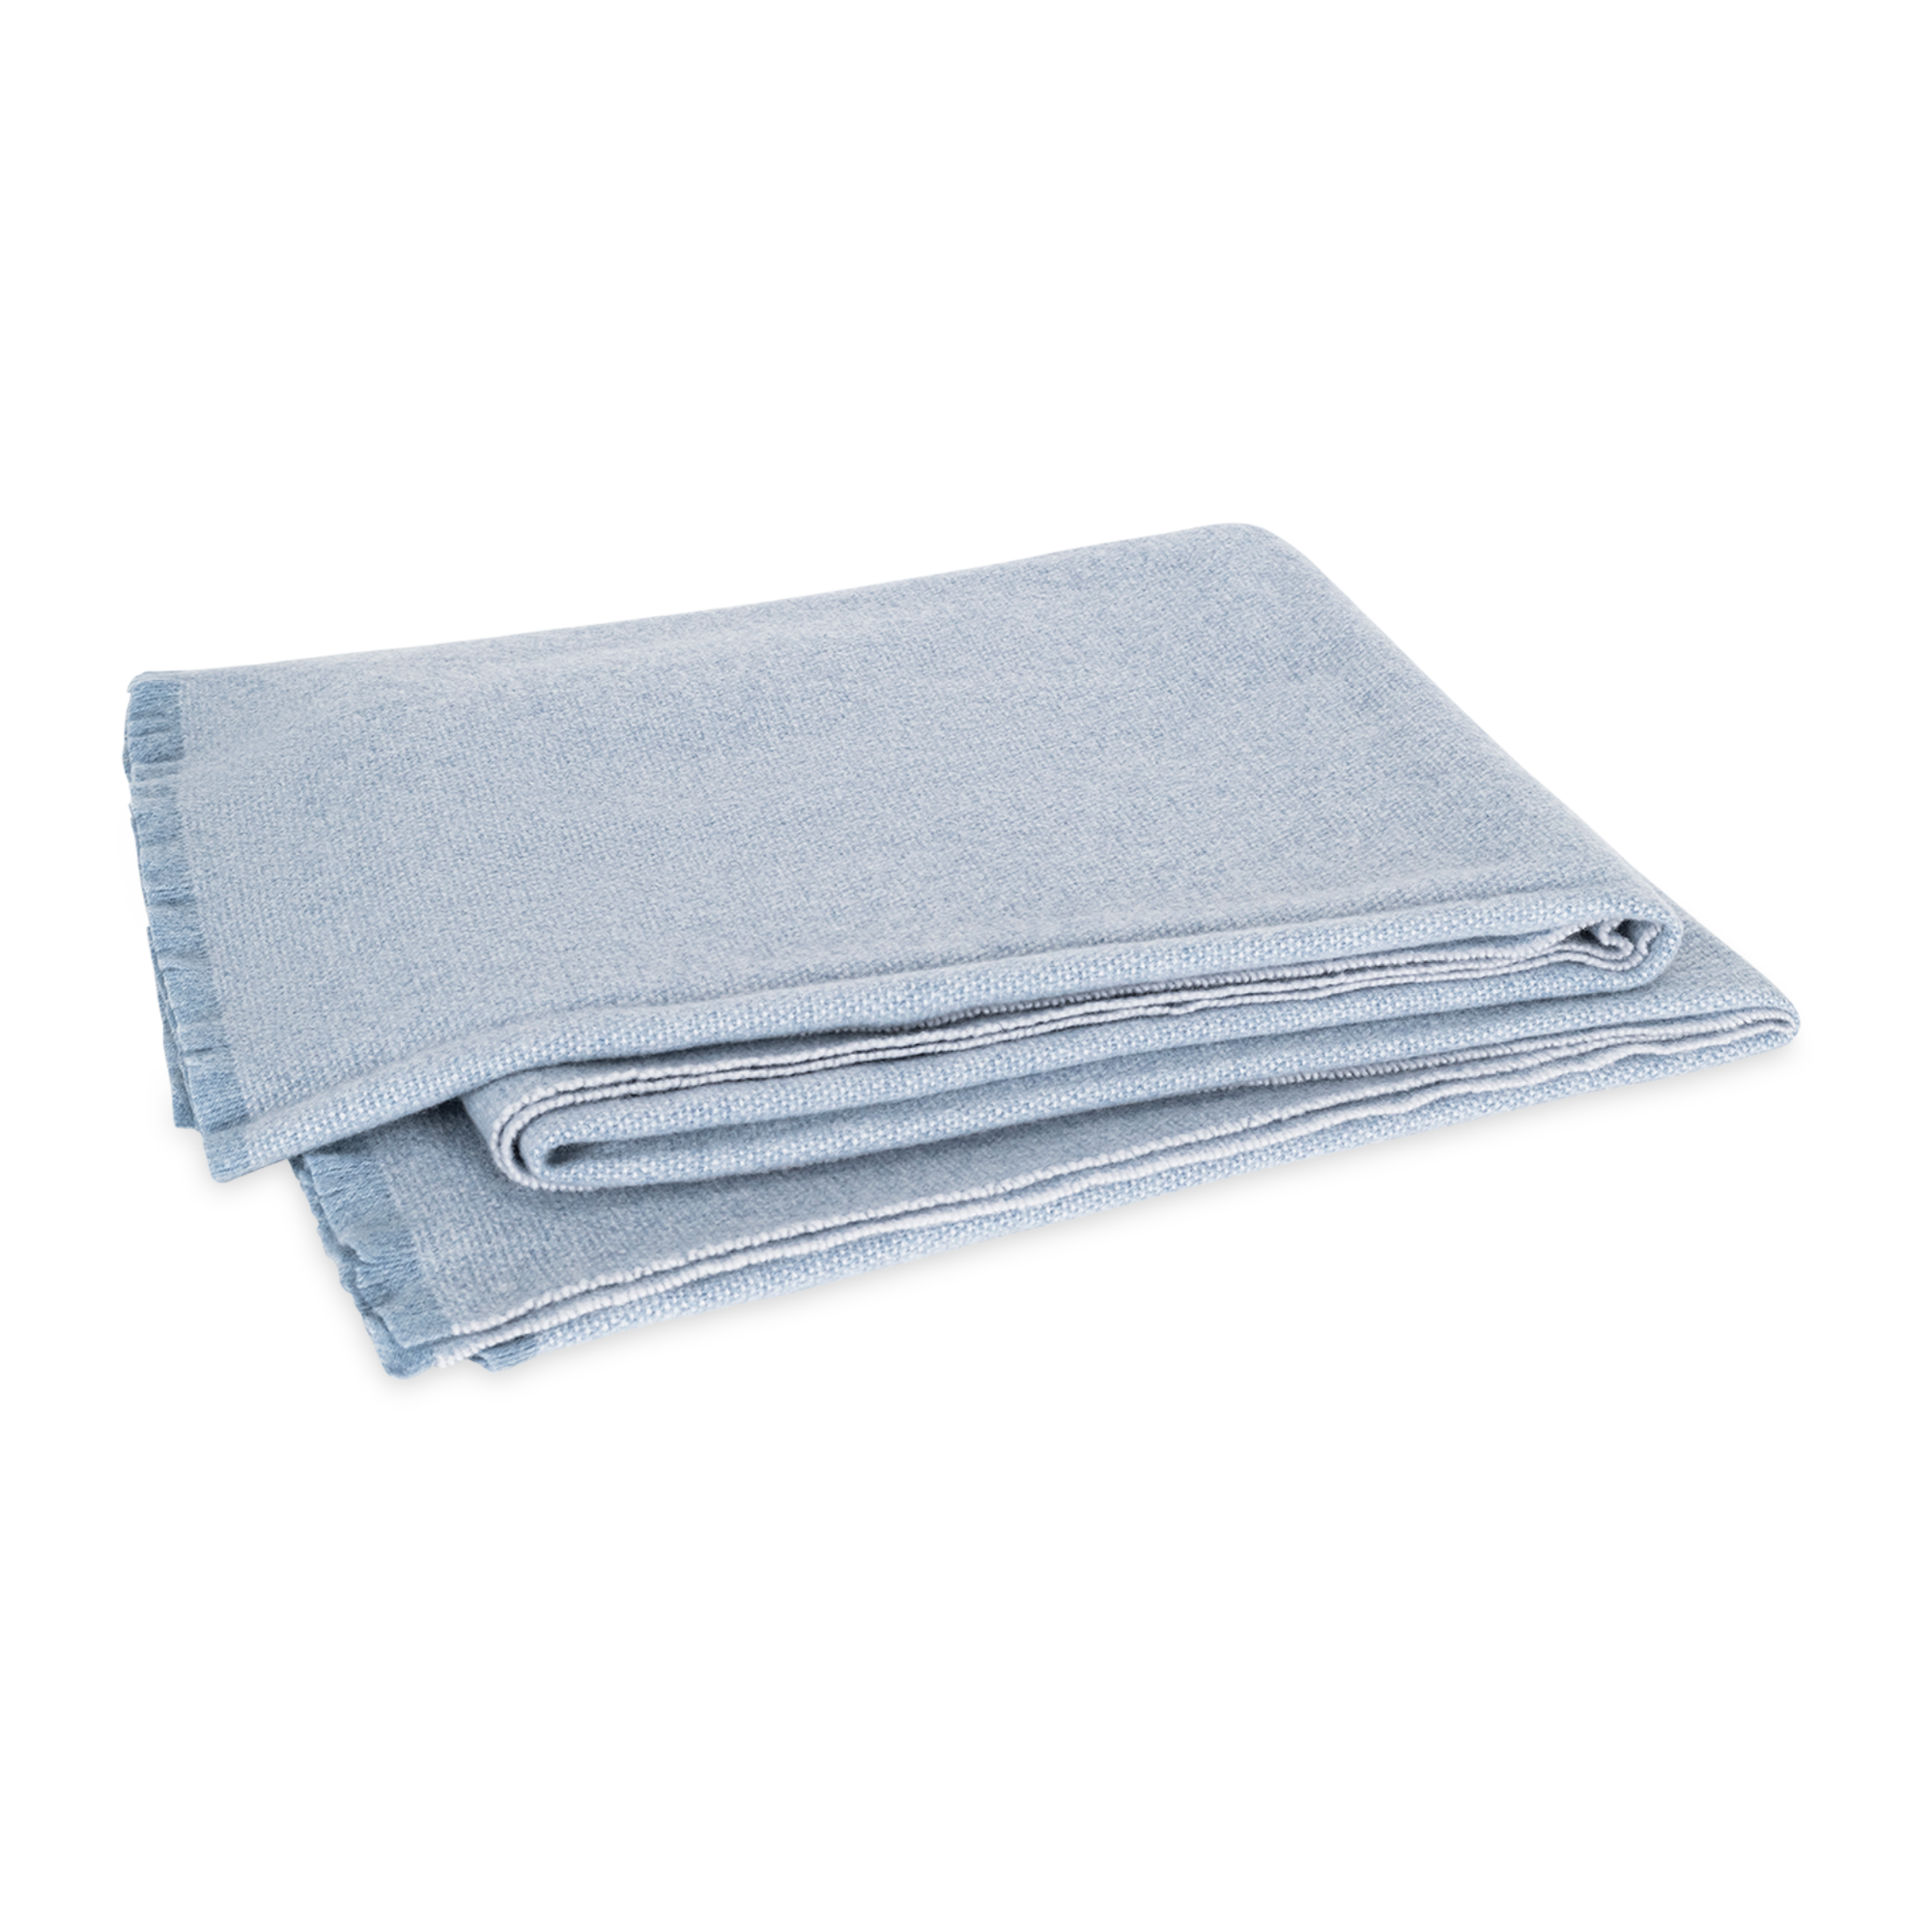 Folded Matouk Agnes Throw in Hazy Blue Color Against White Background